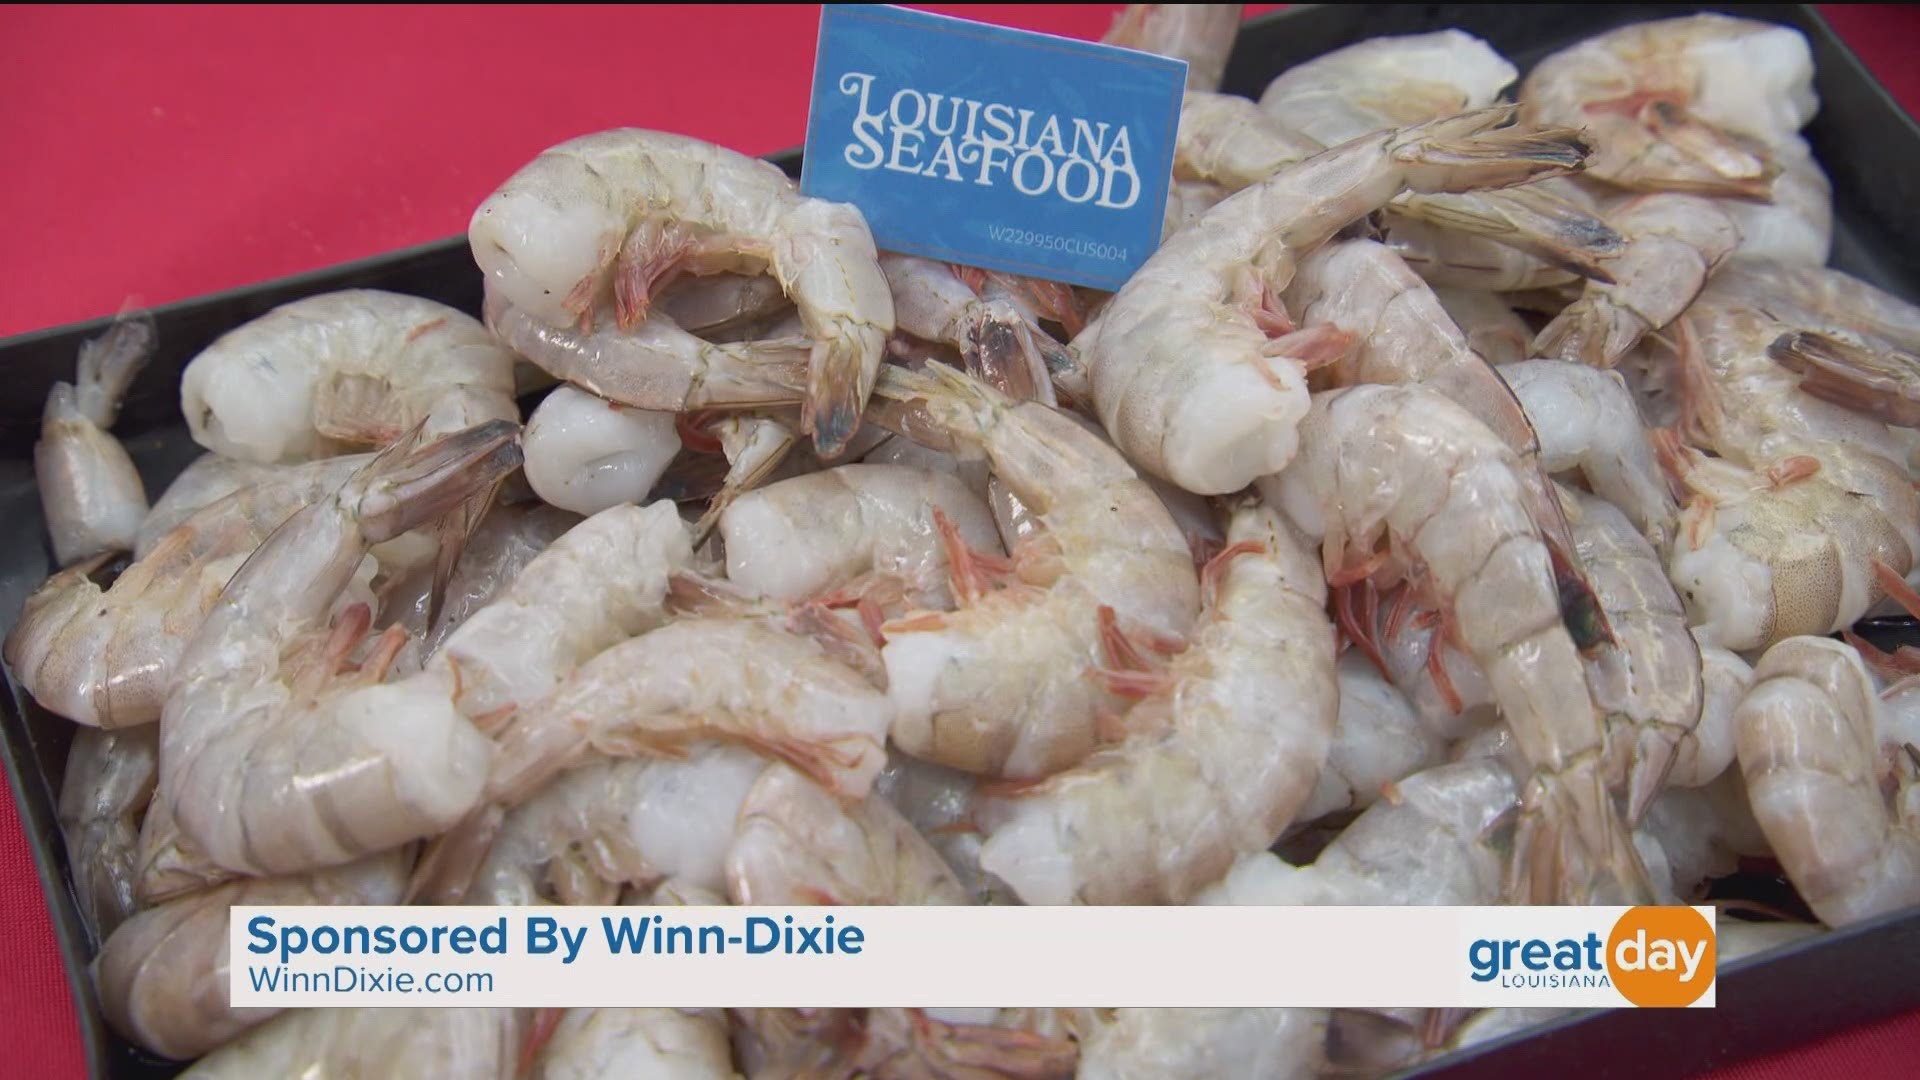 During National Seafood Month, Winn-Dixie and Louisiana Seafood continue to offer customers the best quality local seafood available.